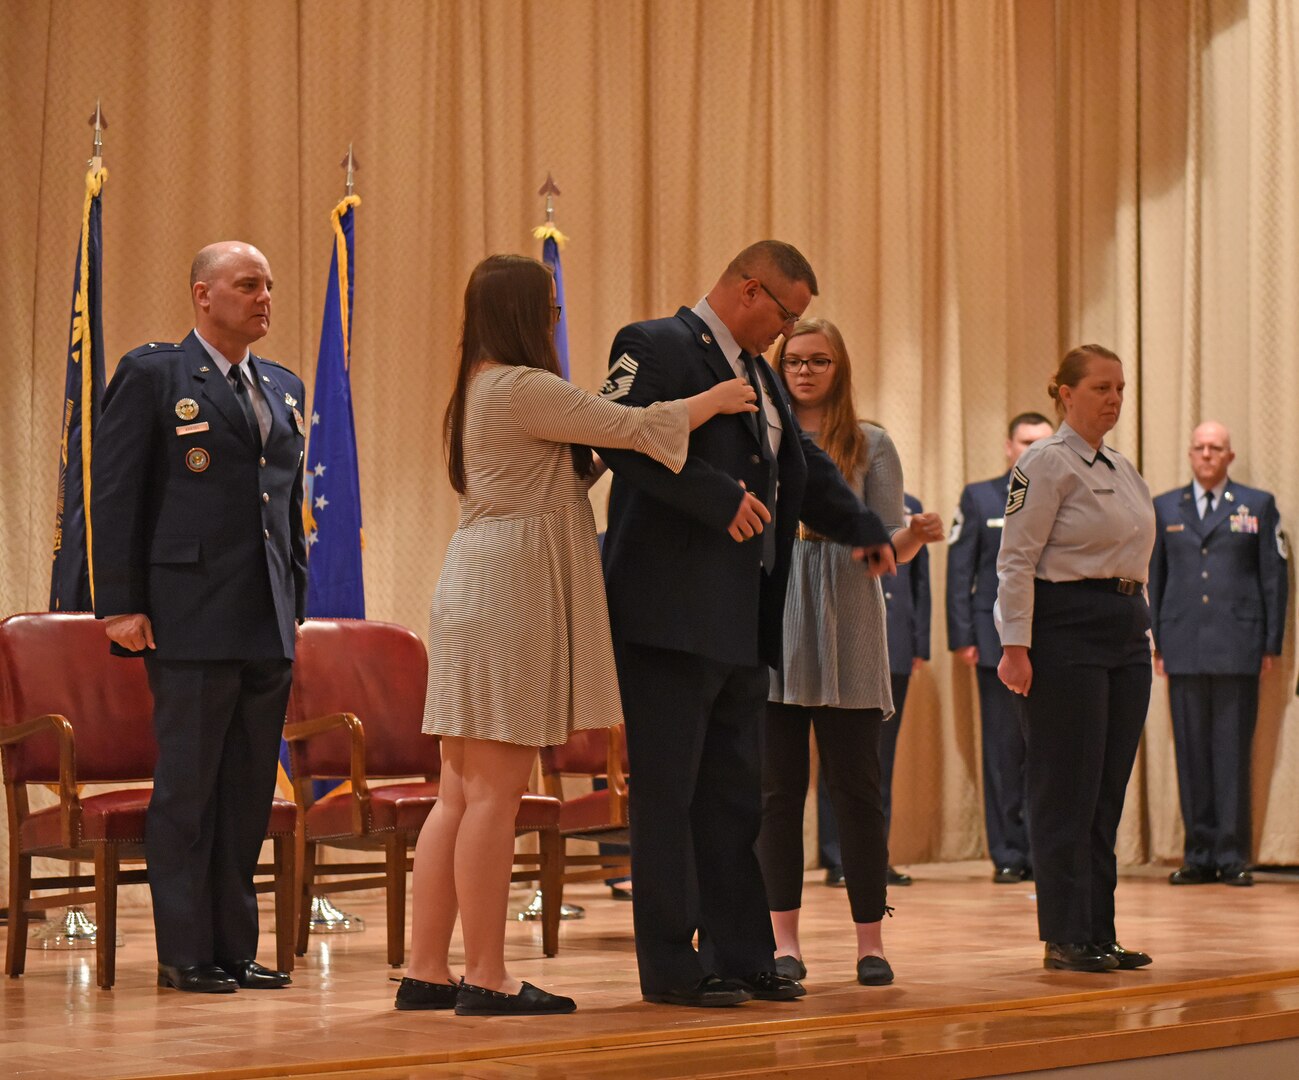 Unique pinning ceremony for Ore. couple